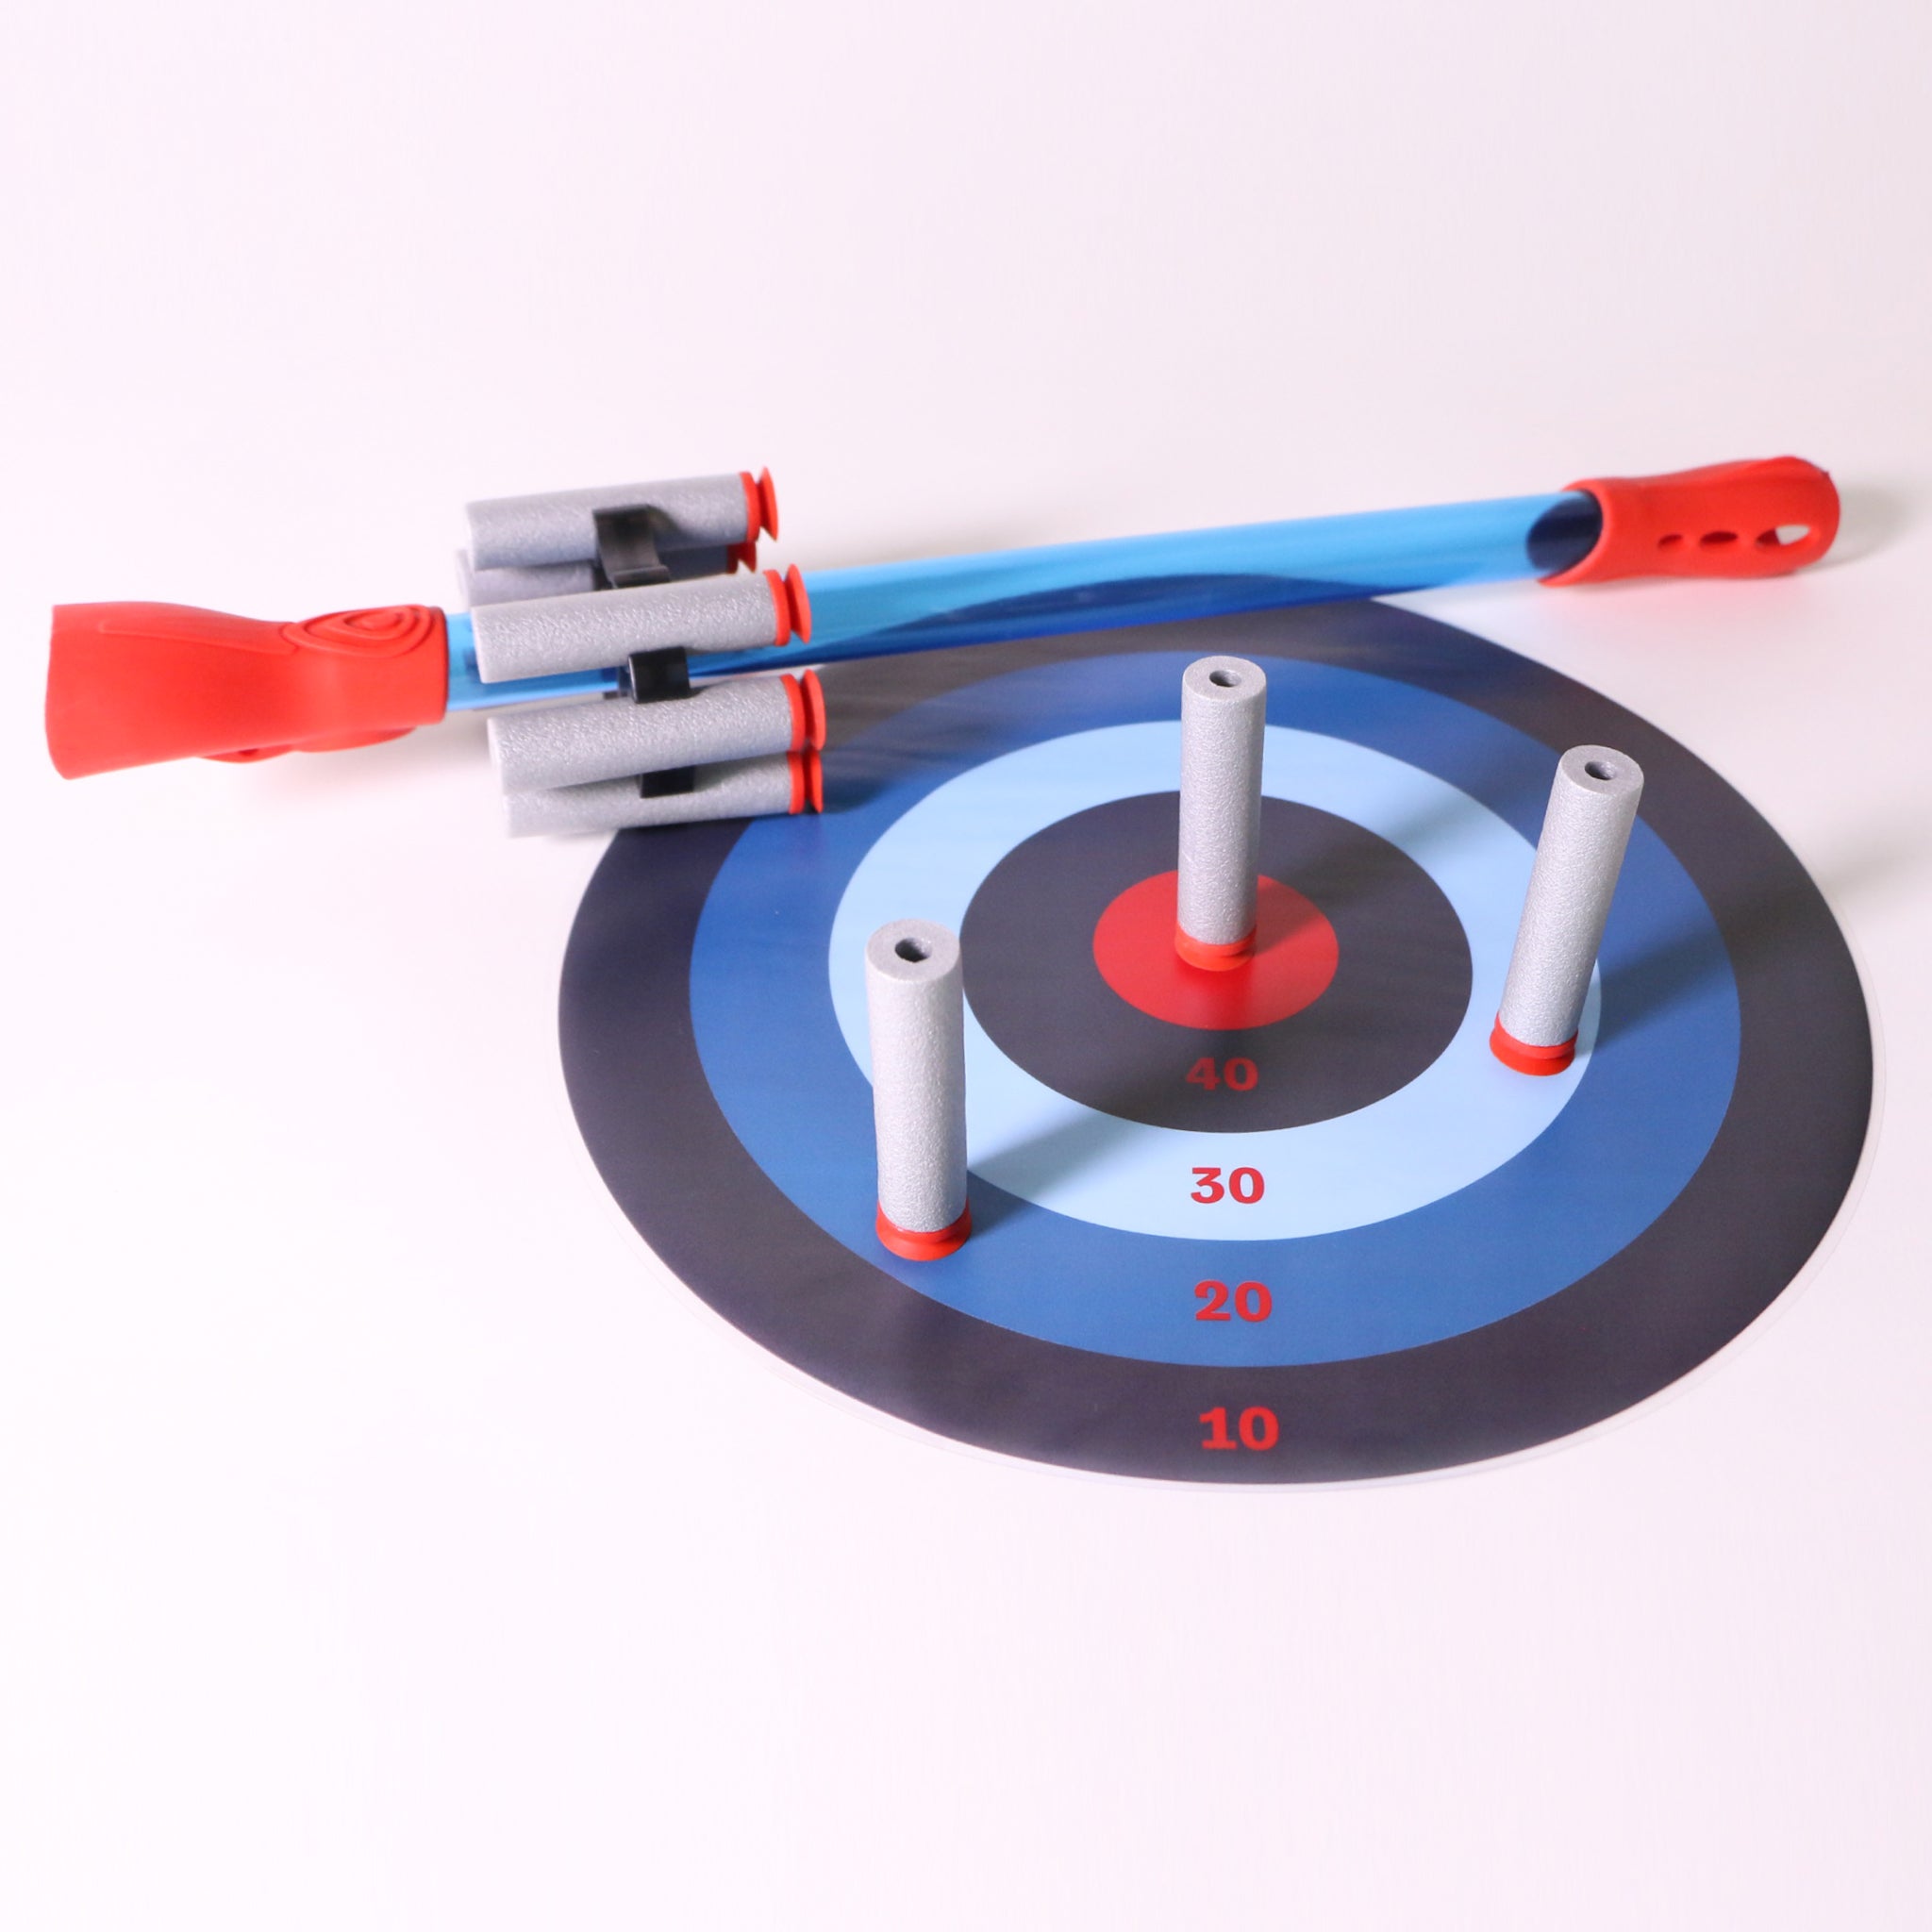 Blow Darts target set by Mighty Fun! Includes 6 darts, ammo holder and target.